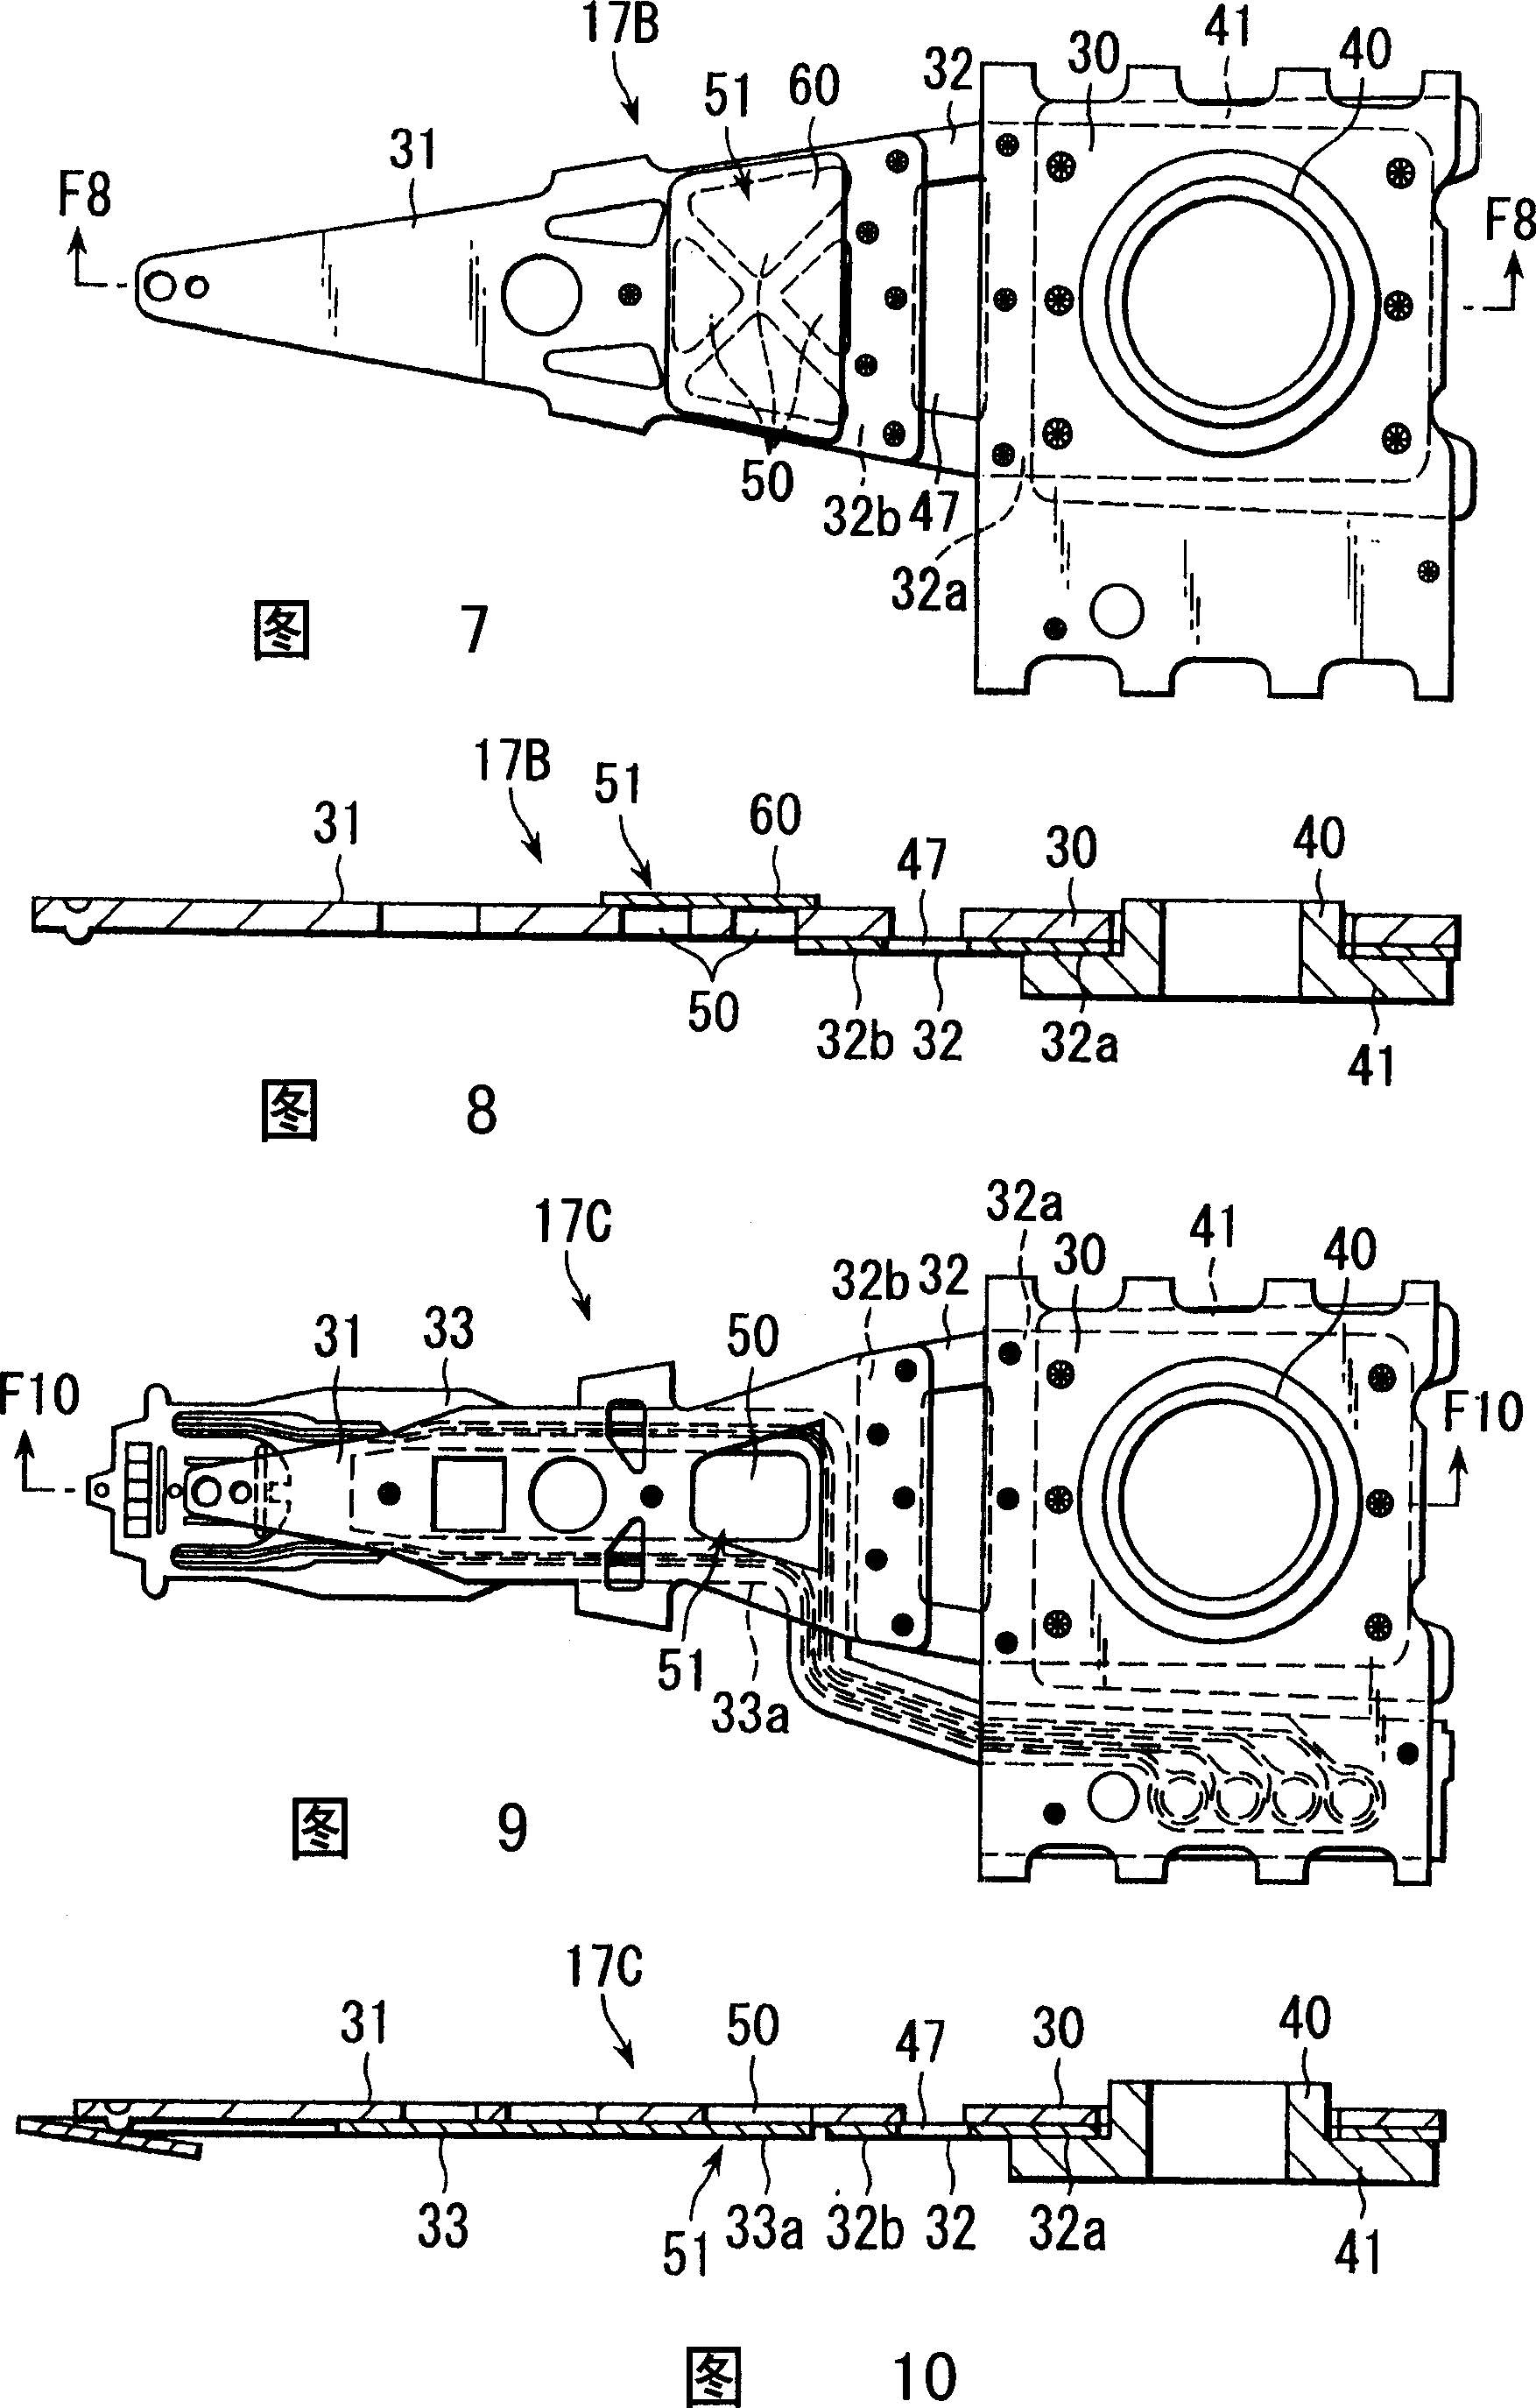 Suspension of magnetic disc driver